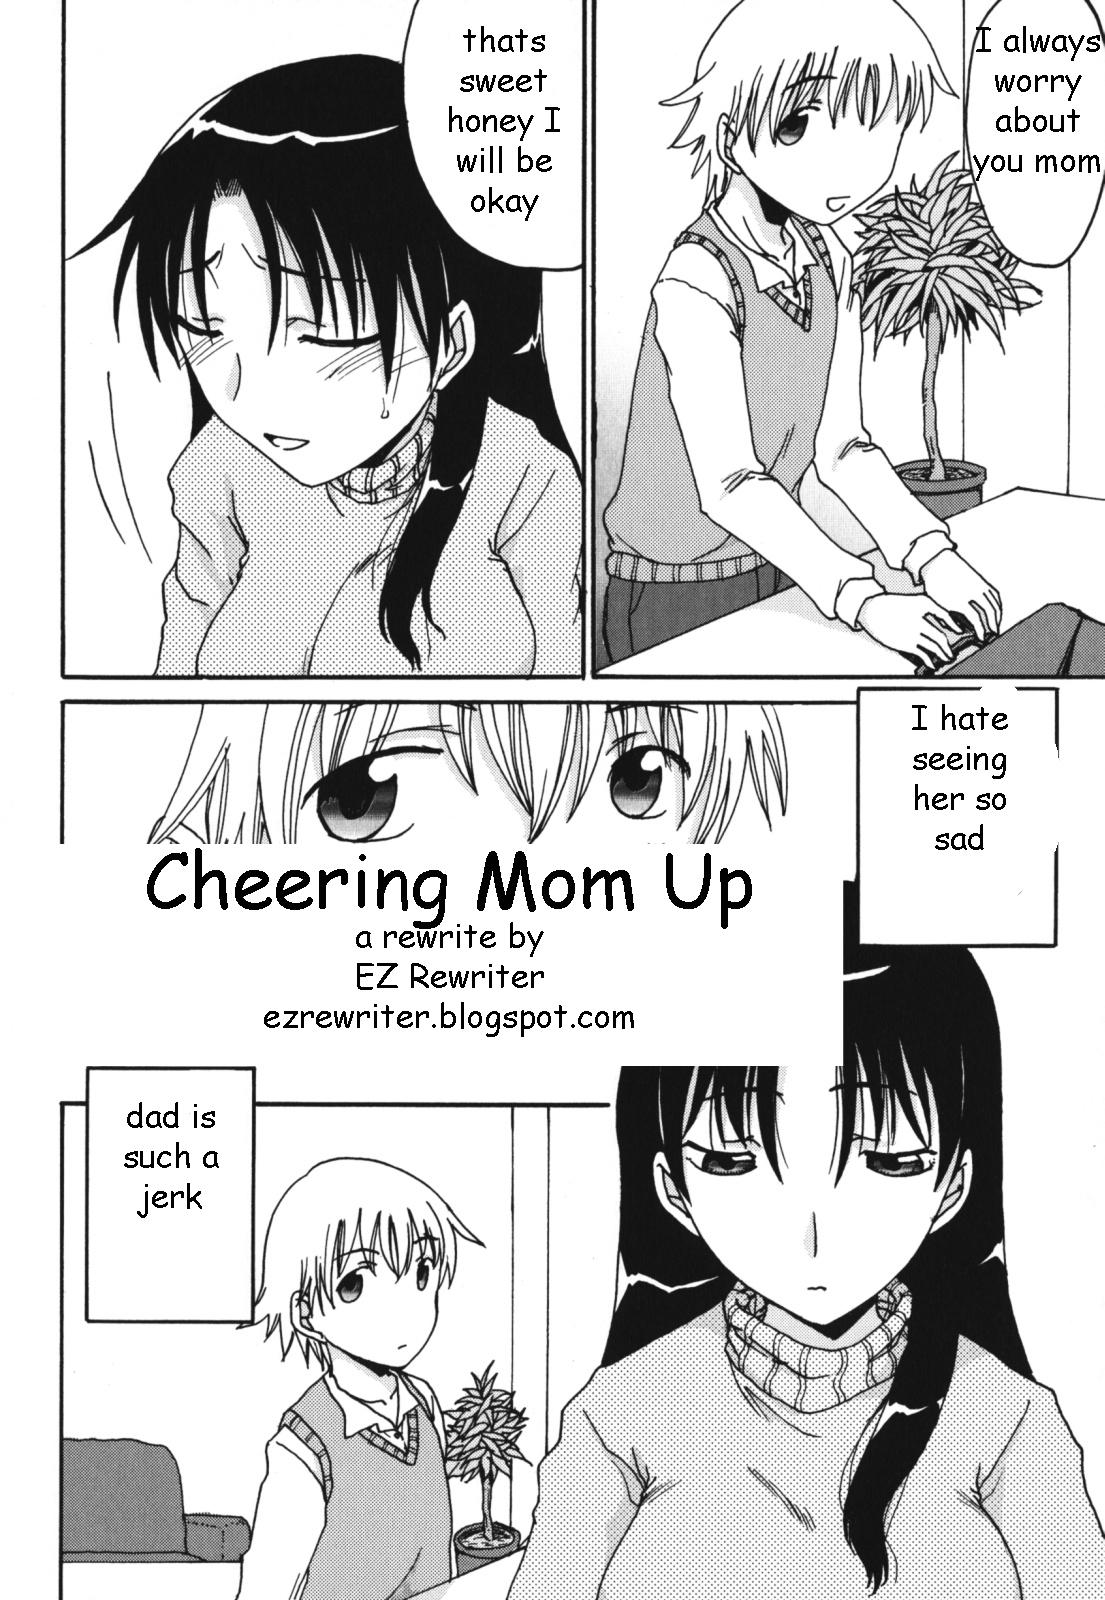 Chubby Cheering Mom Up Naughty - Page 2